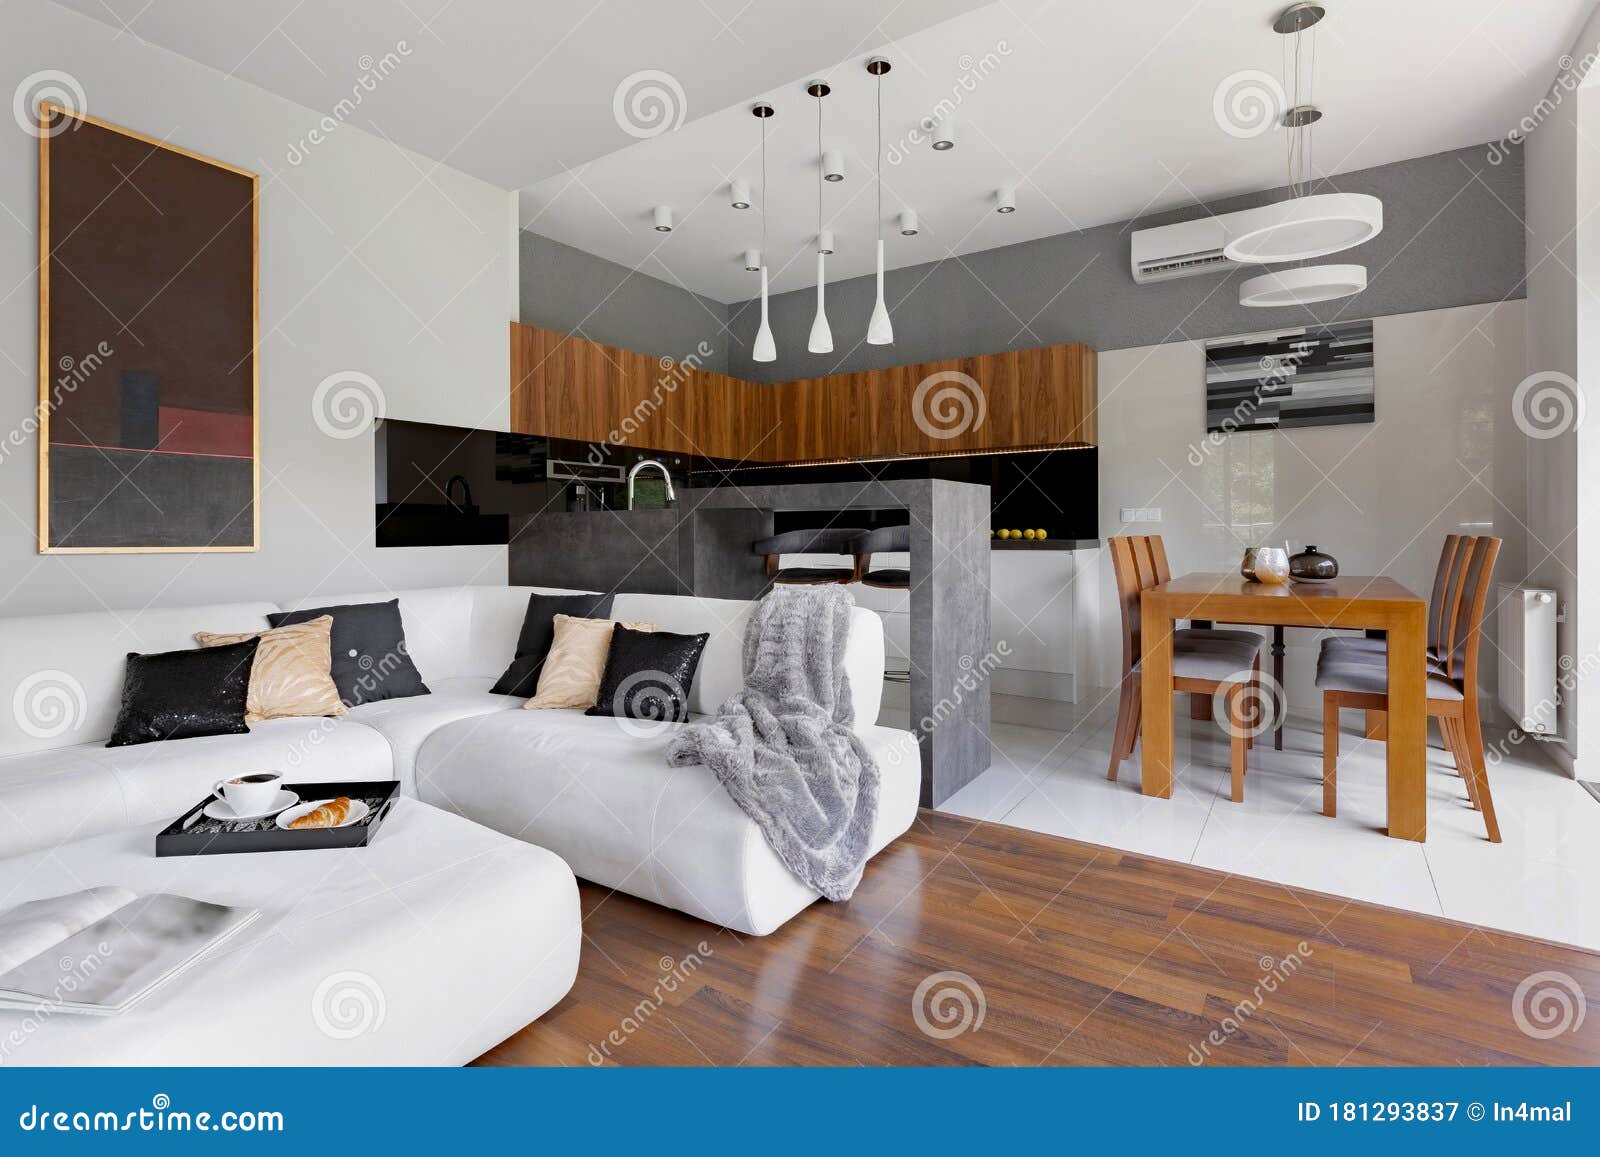 Modern Open Plan Apartment Stock Image. Image Of Coffee - 181293837